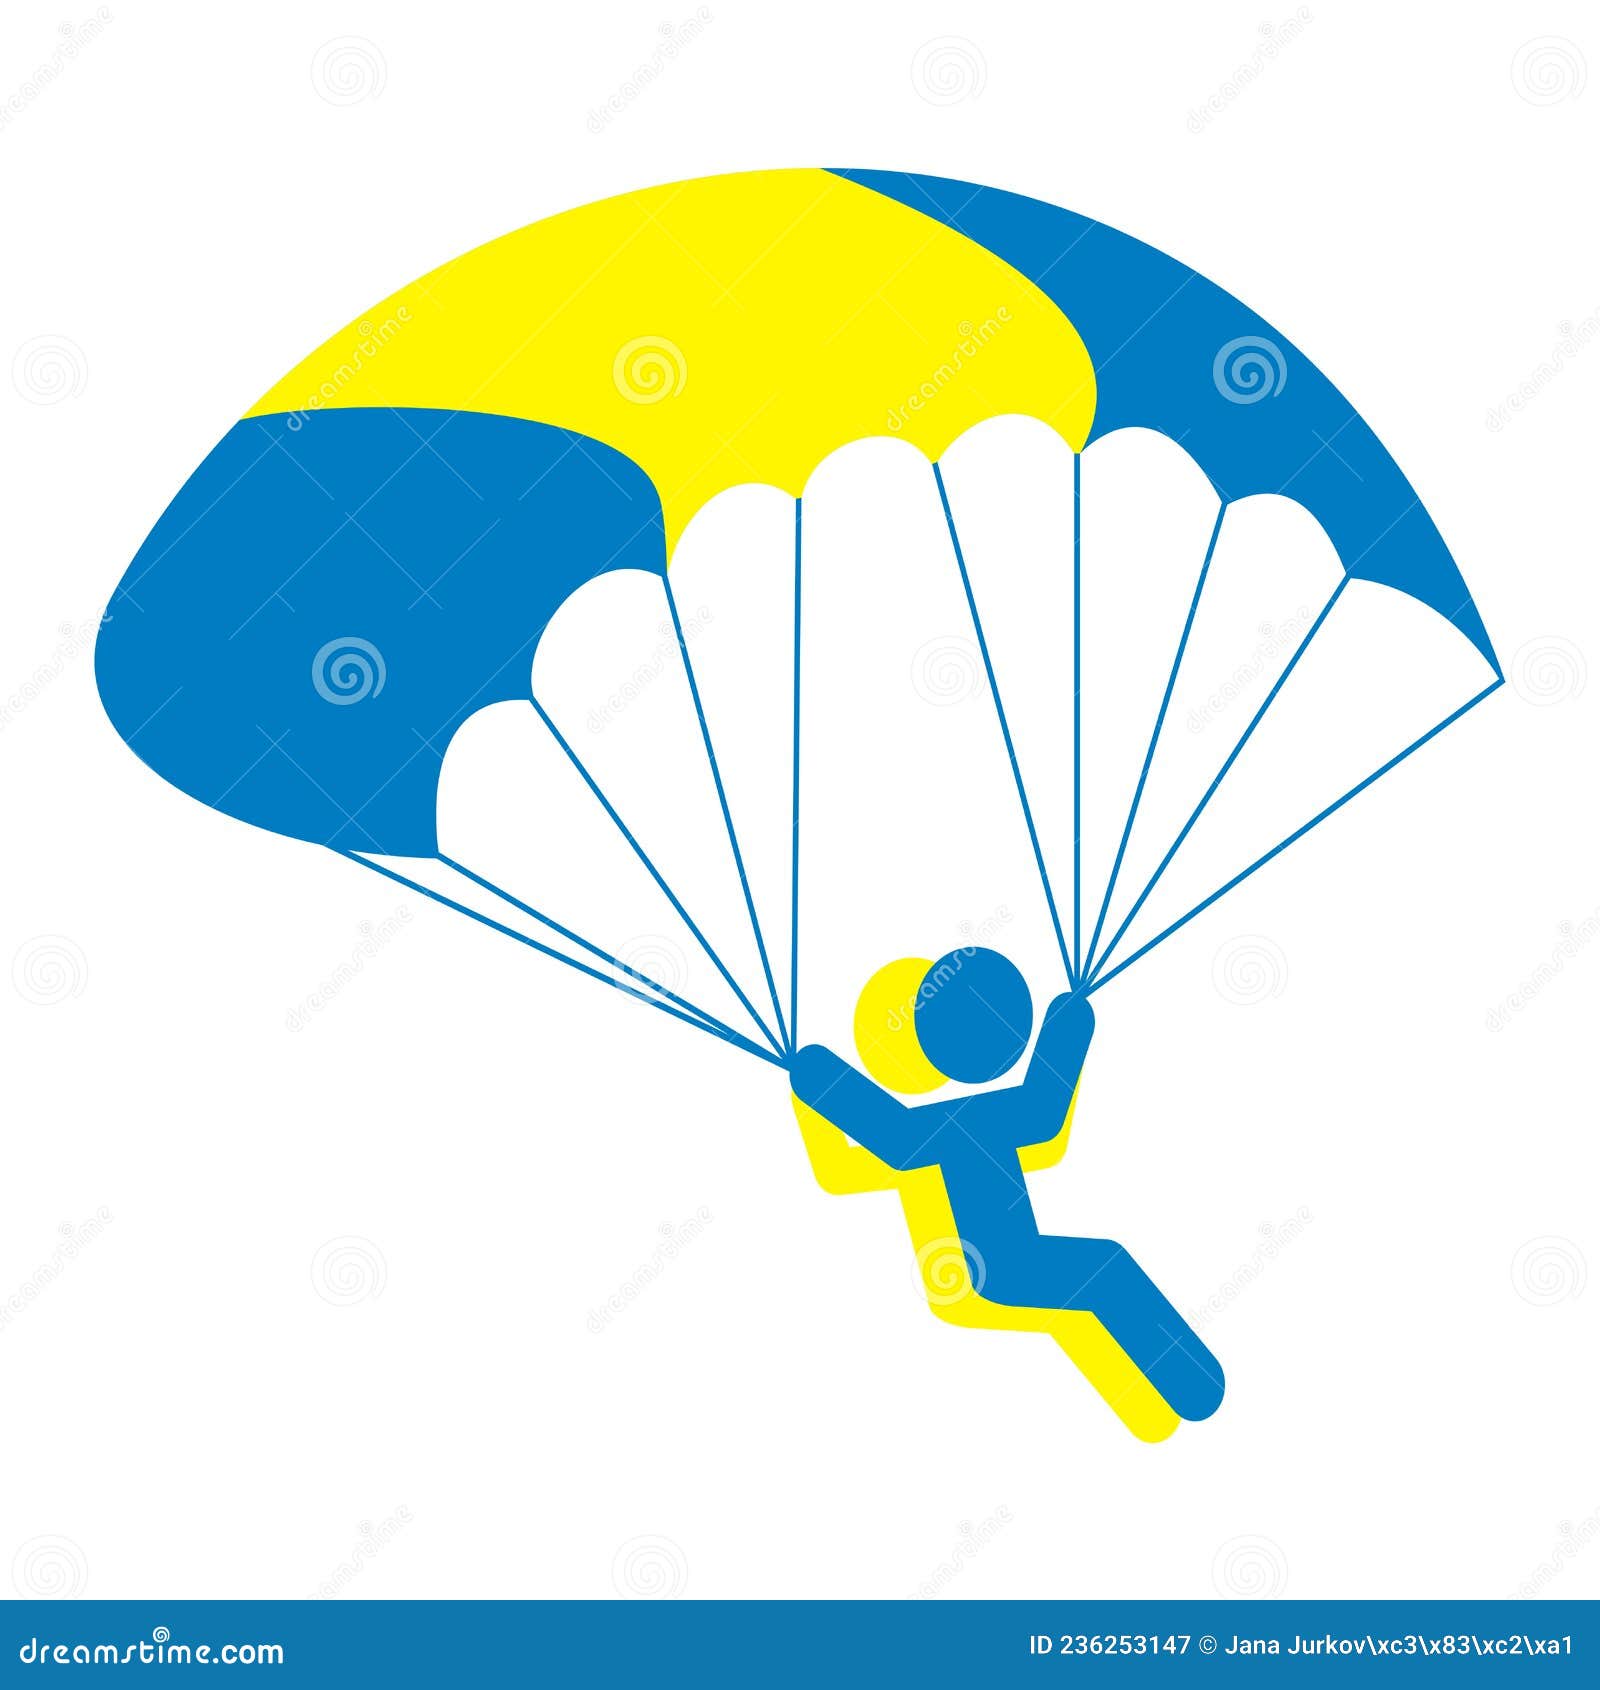 paragliding, two people with parachute, eps.